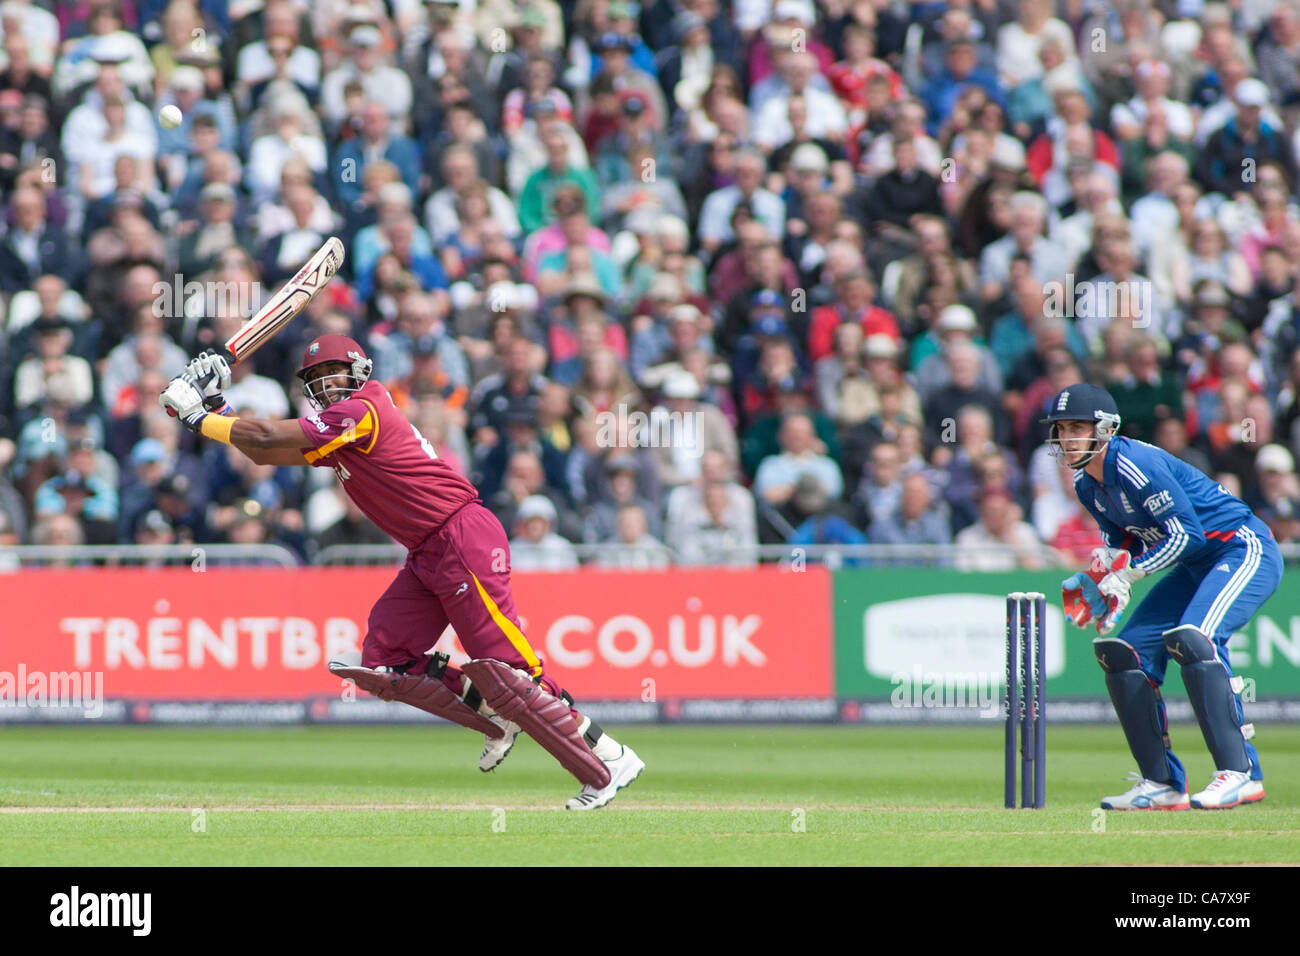 24/06/2012 Nottingham England.  during the England vs The West Indies, International 20/20 cricket match part of the the Nat West Series played at Trent Bridge  Ground. Mandatory credit: Mitchell Gunn./Alamy Live News Stock Photo